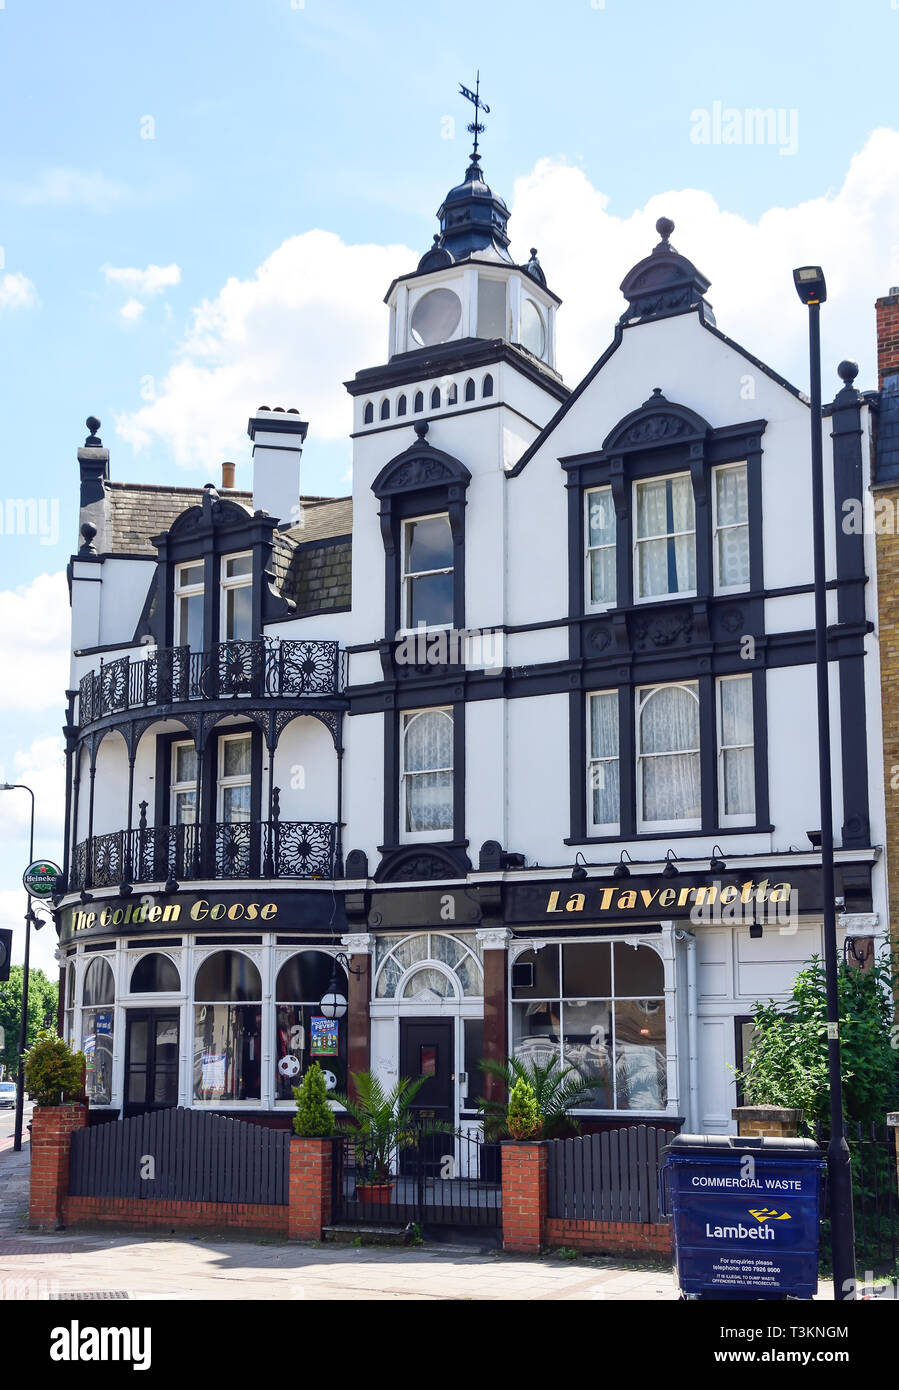 The Golden Goose Pub, Camberwell New Road, Camberwell, London Borough of  Southwark, Greater London, England, United Kingdom Stock Photo - Alamy